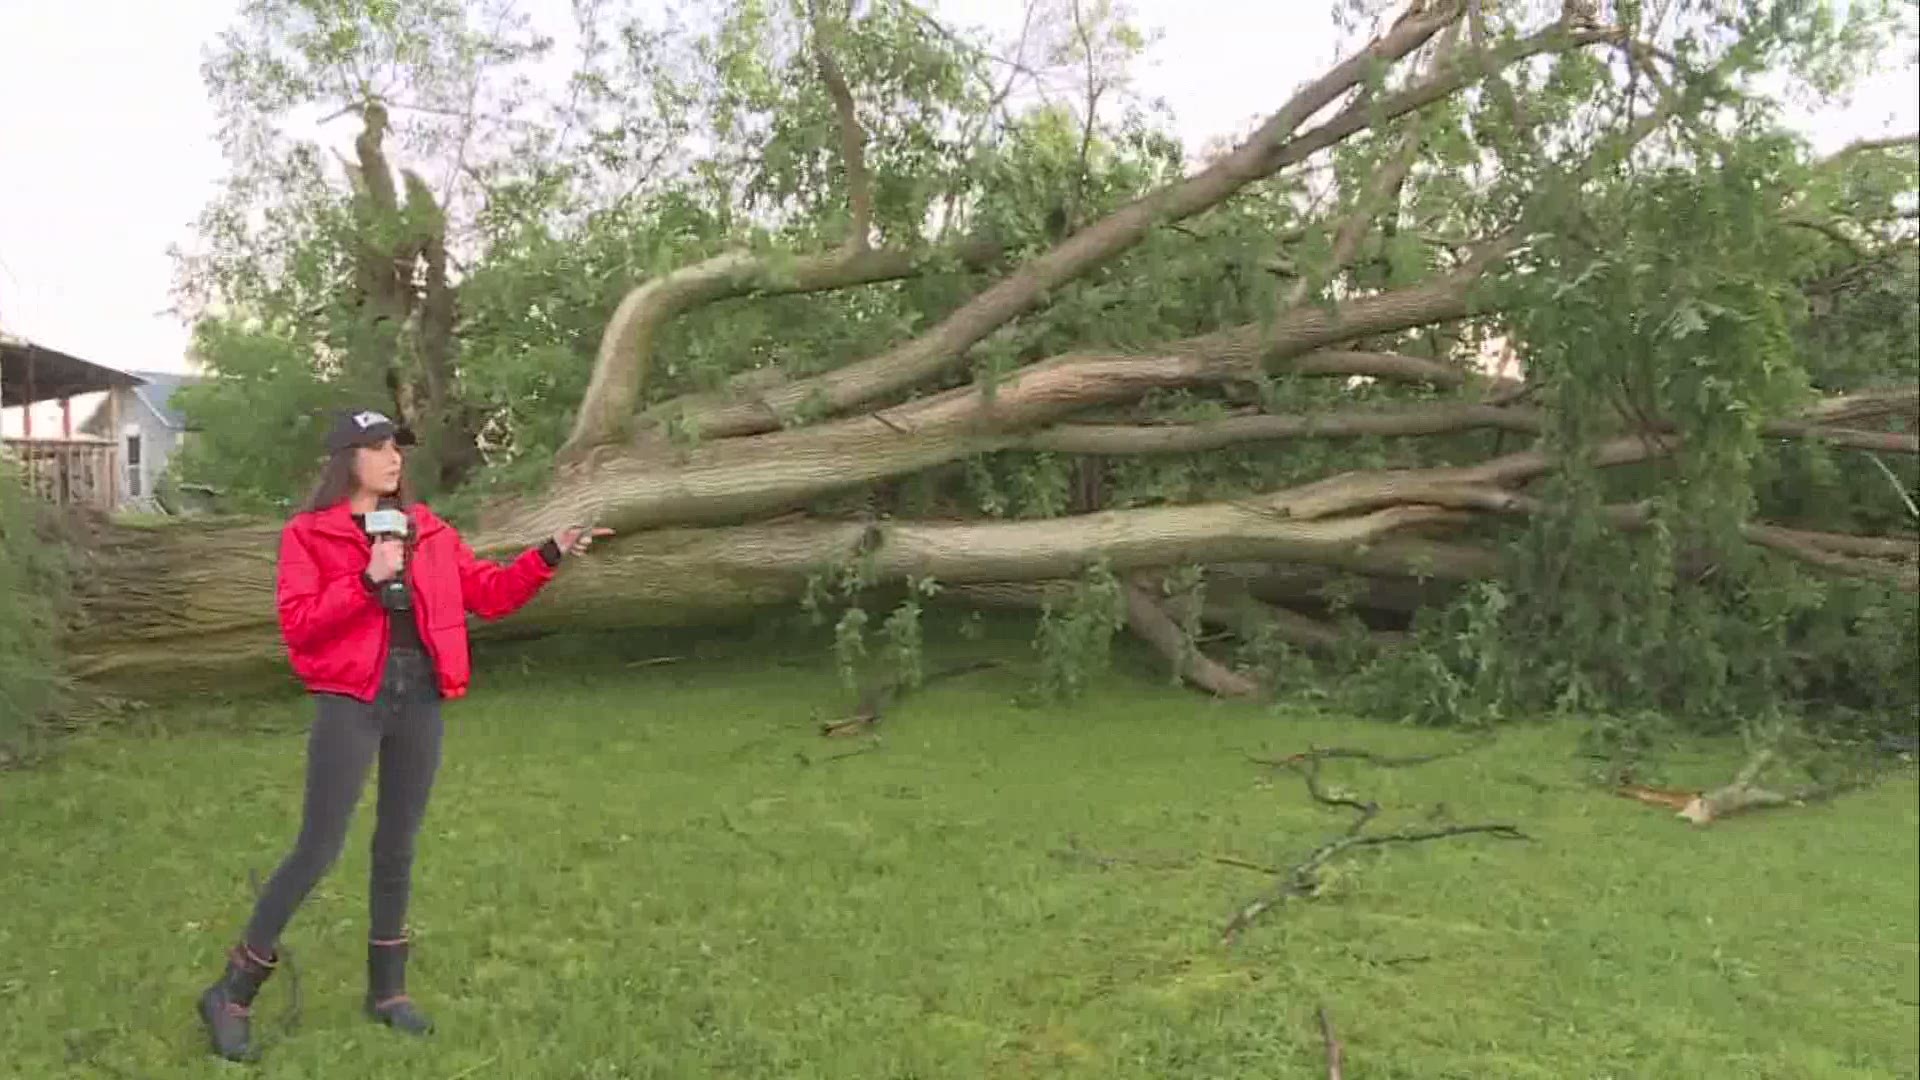 Severe thunderstorms sweep across West Michigan bringing high winds and power outages